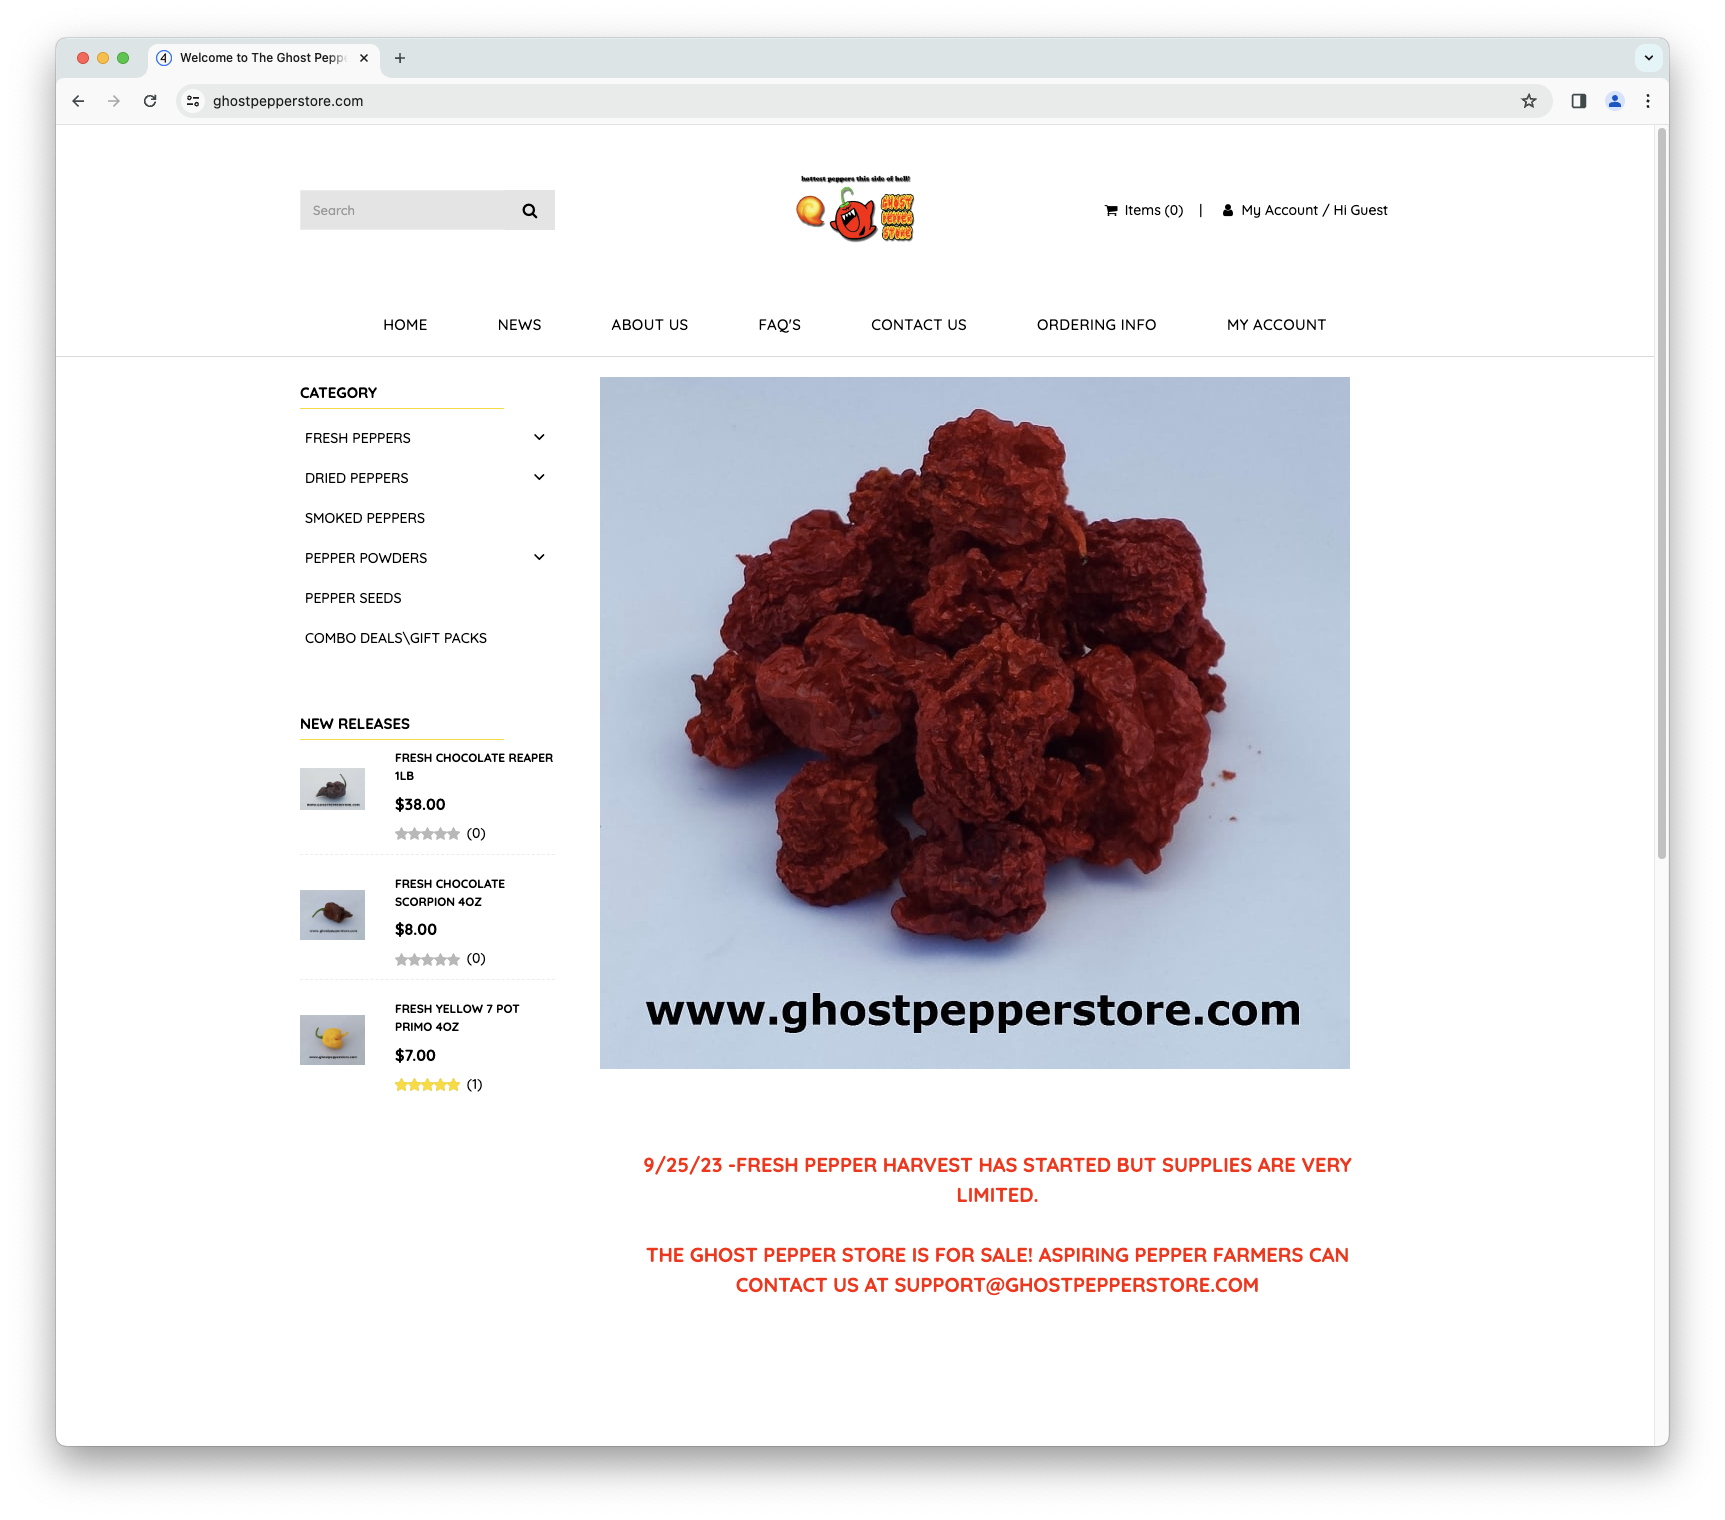 The Ghost Pepper Store website